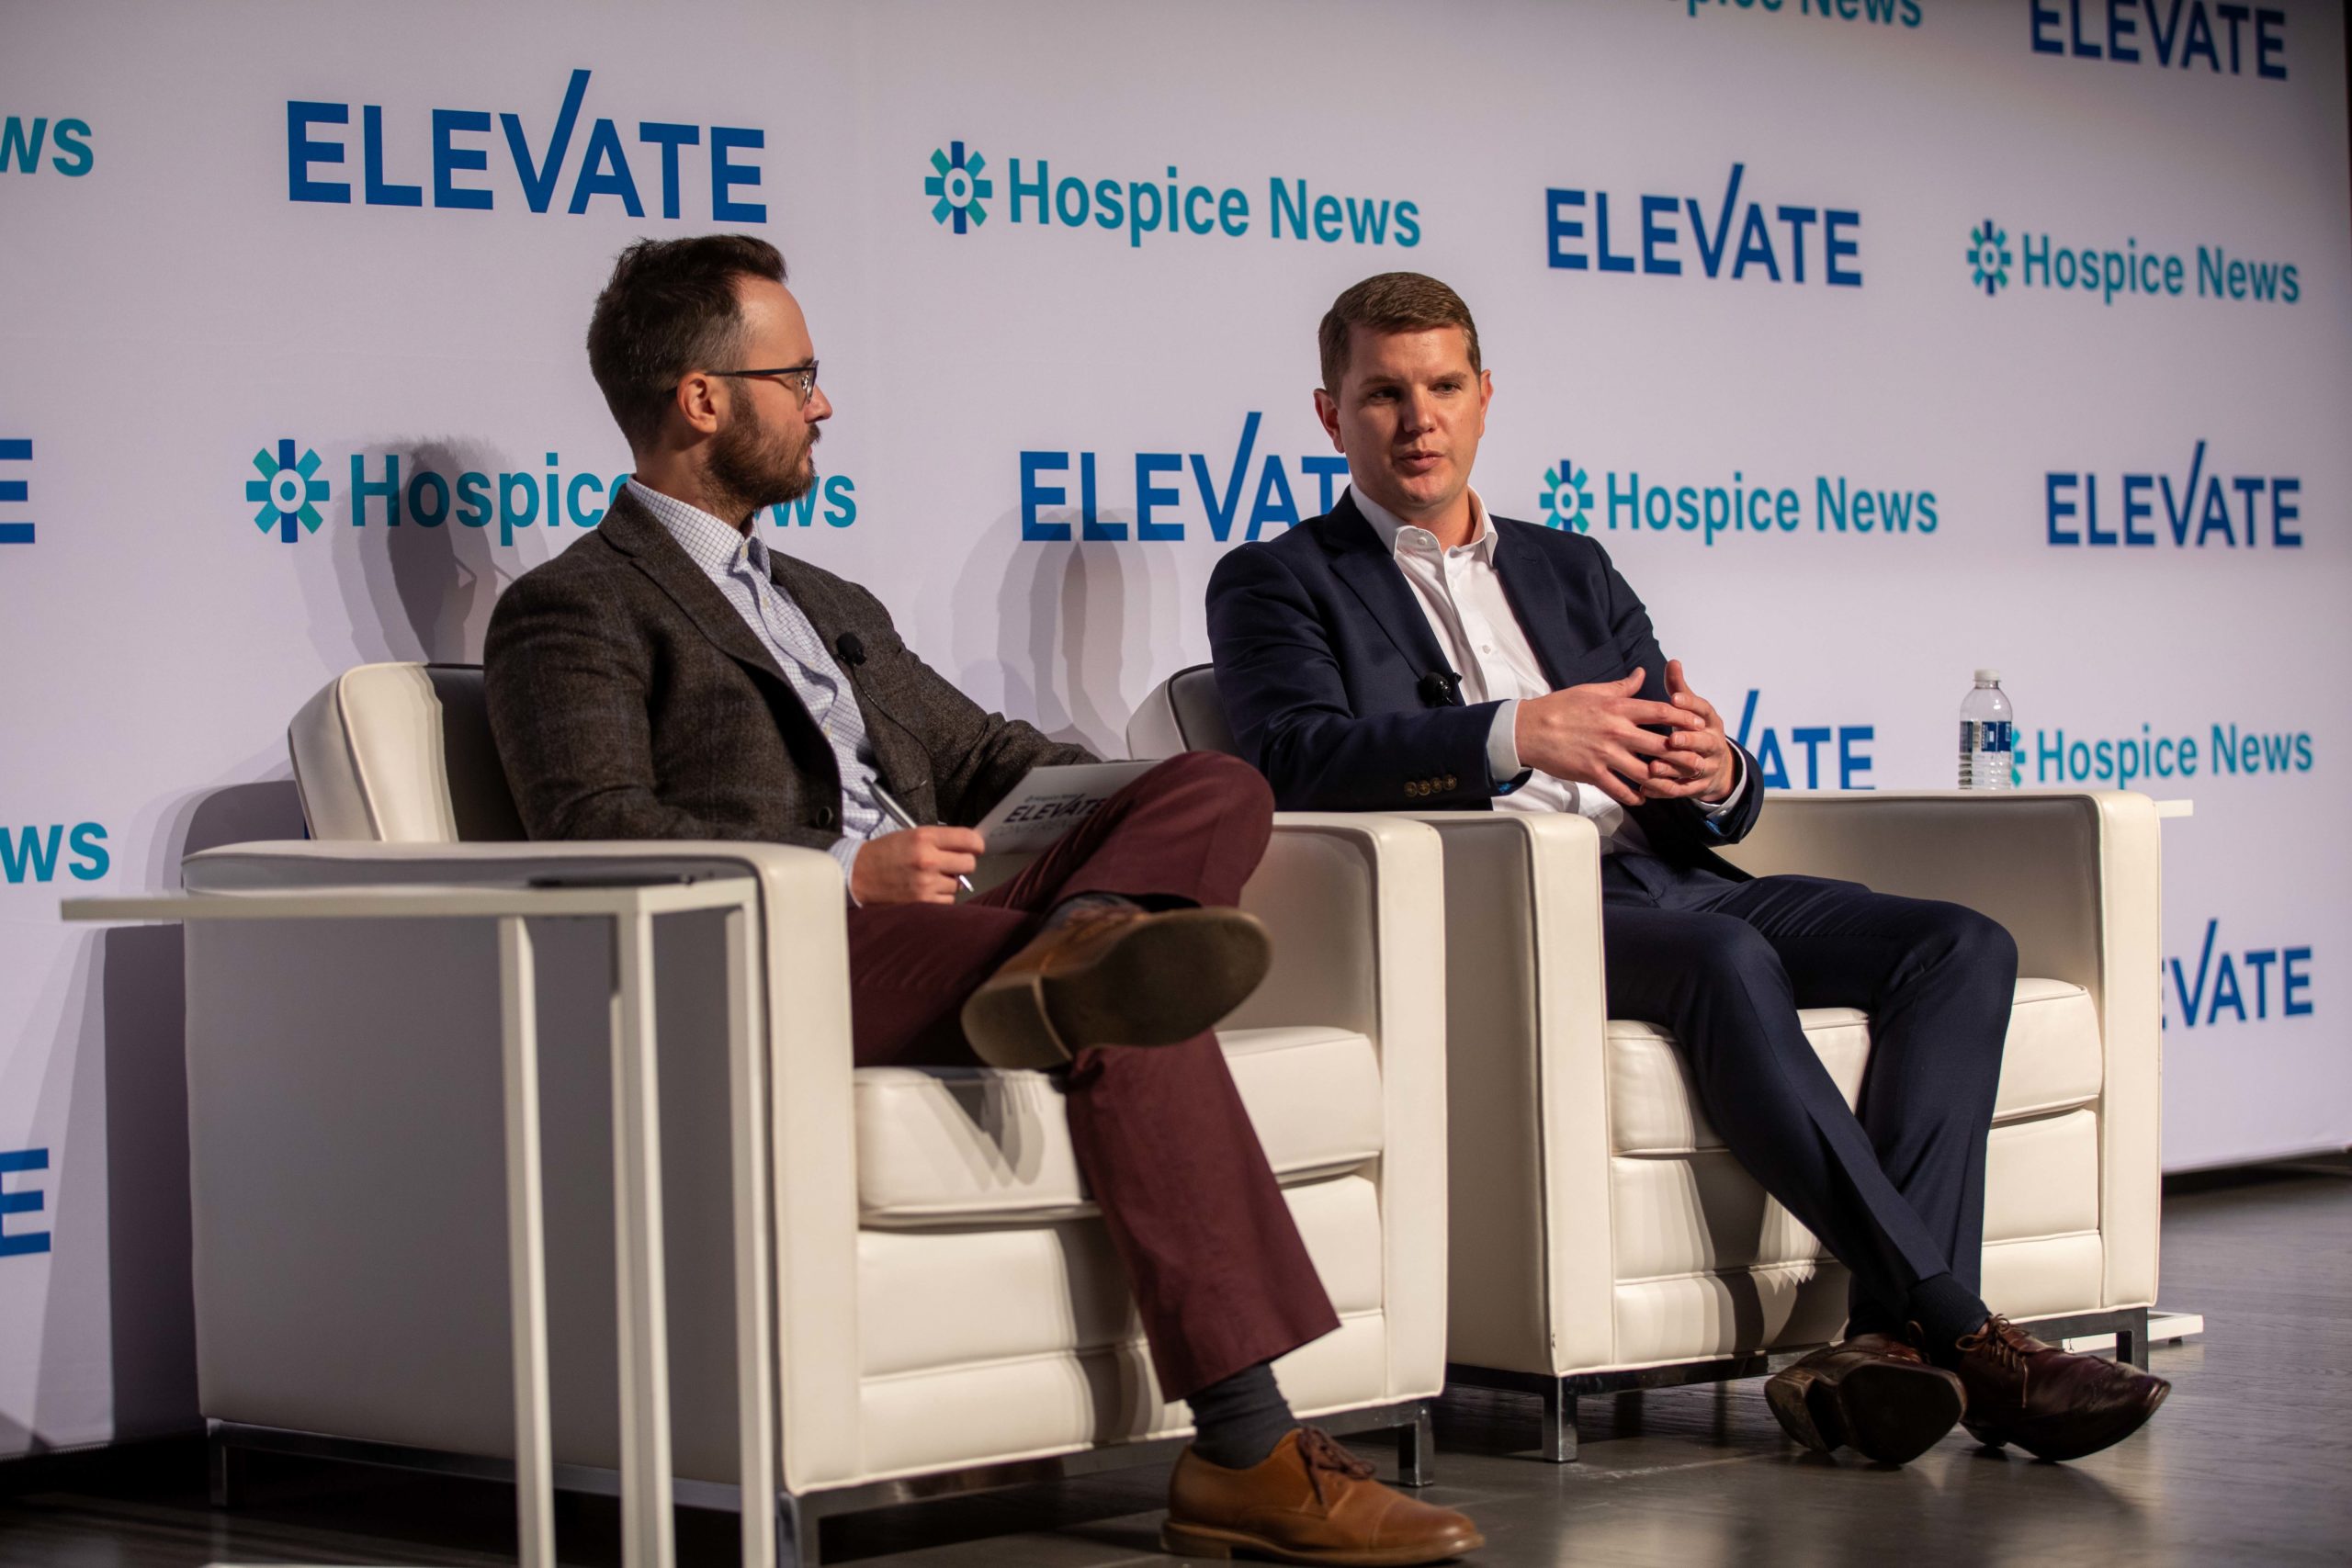 Photo of Daniel Reese, IntellaTriage CEO discussing patient experience at the ELEVATE conference with Bob Holly